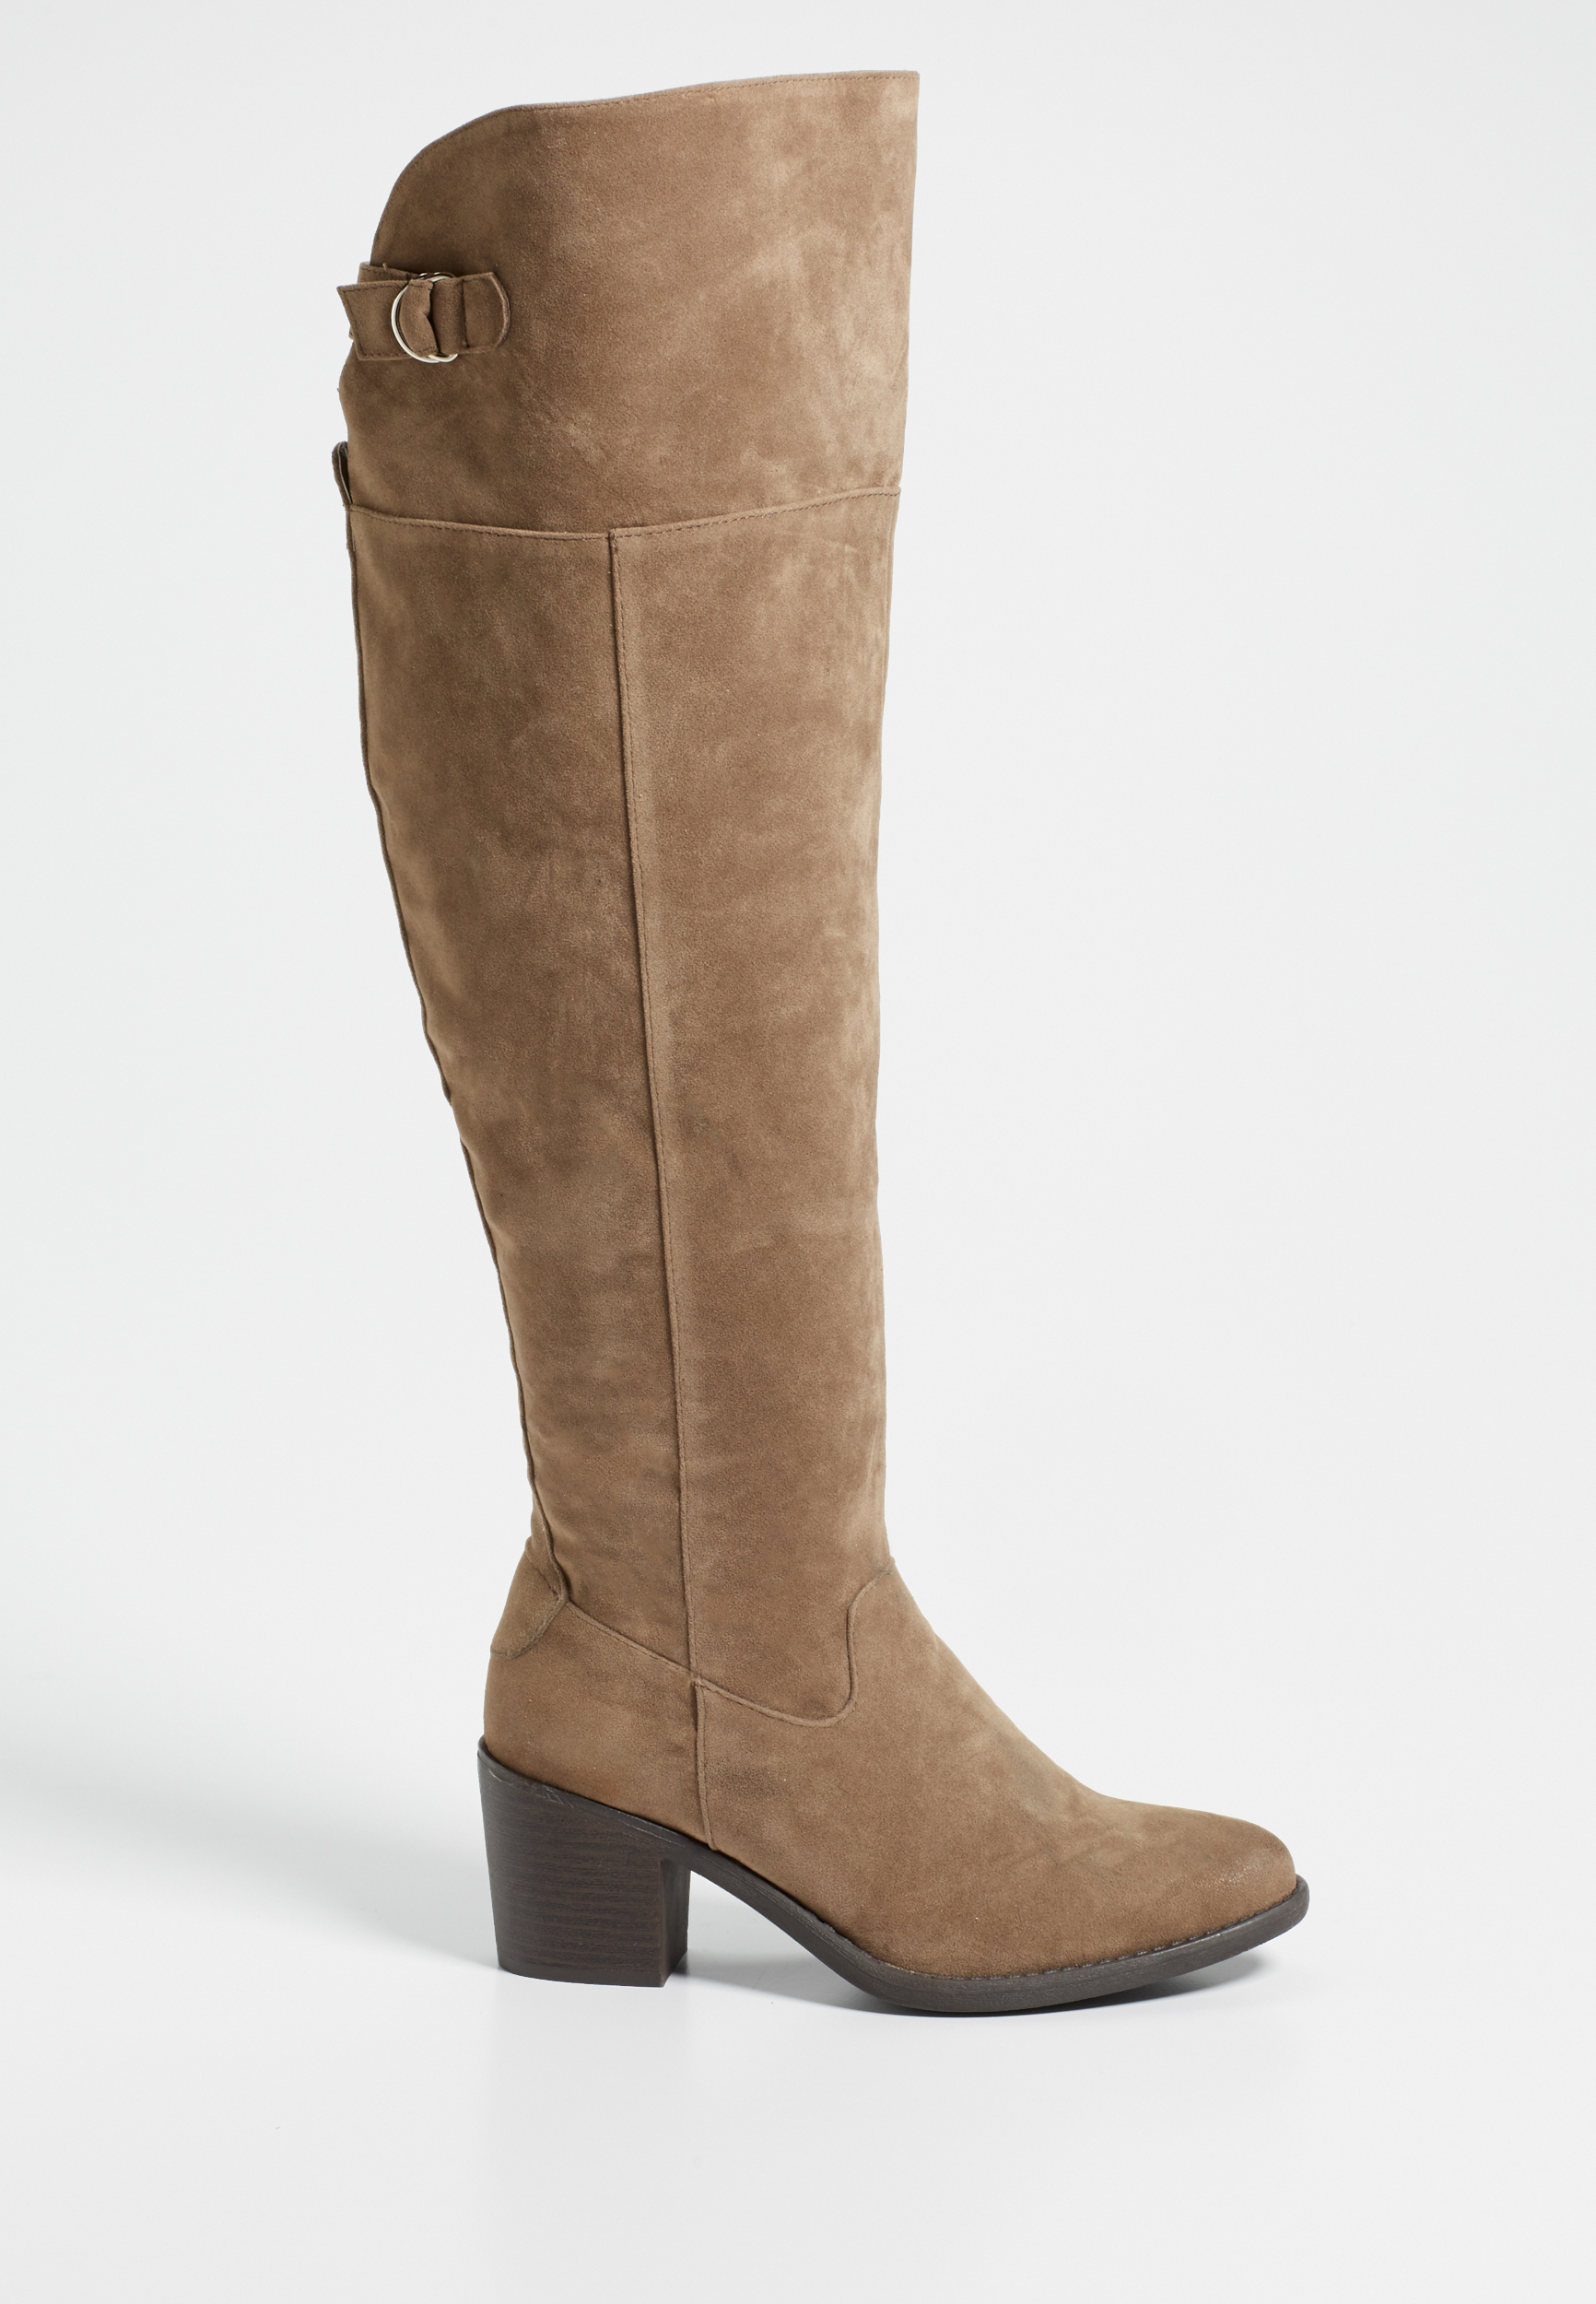 Sabrina wide calf faux suede over the knee boot in taupe | maurices